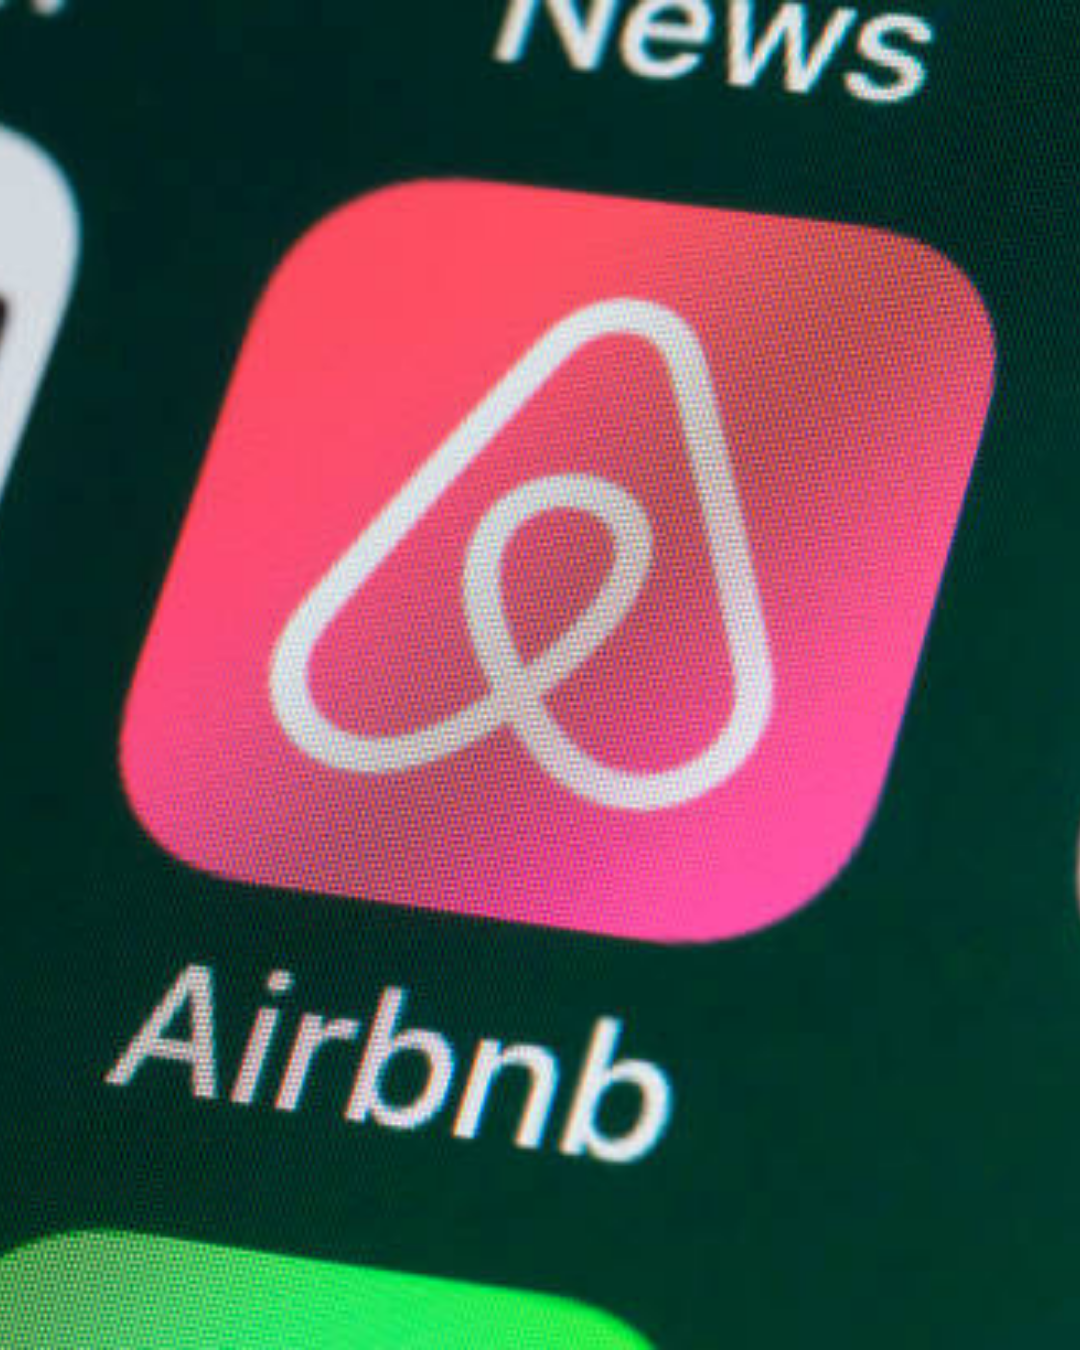 Airbnb's Resilience: Journey Through the Pandemic